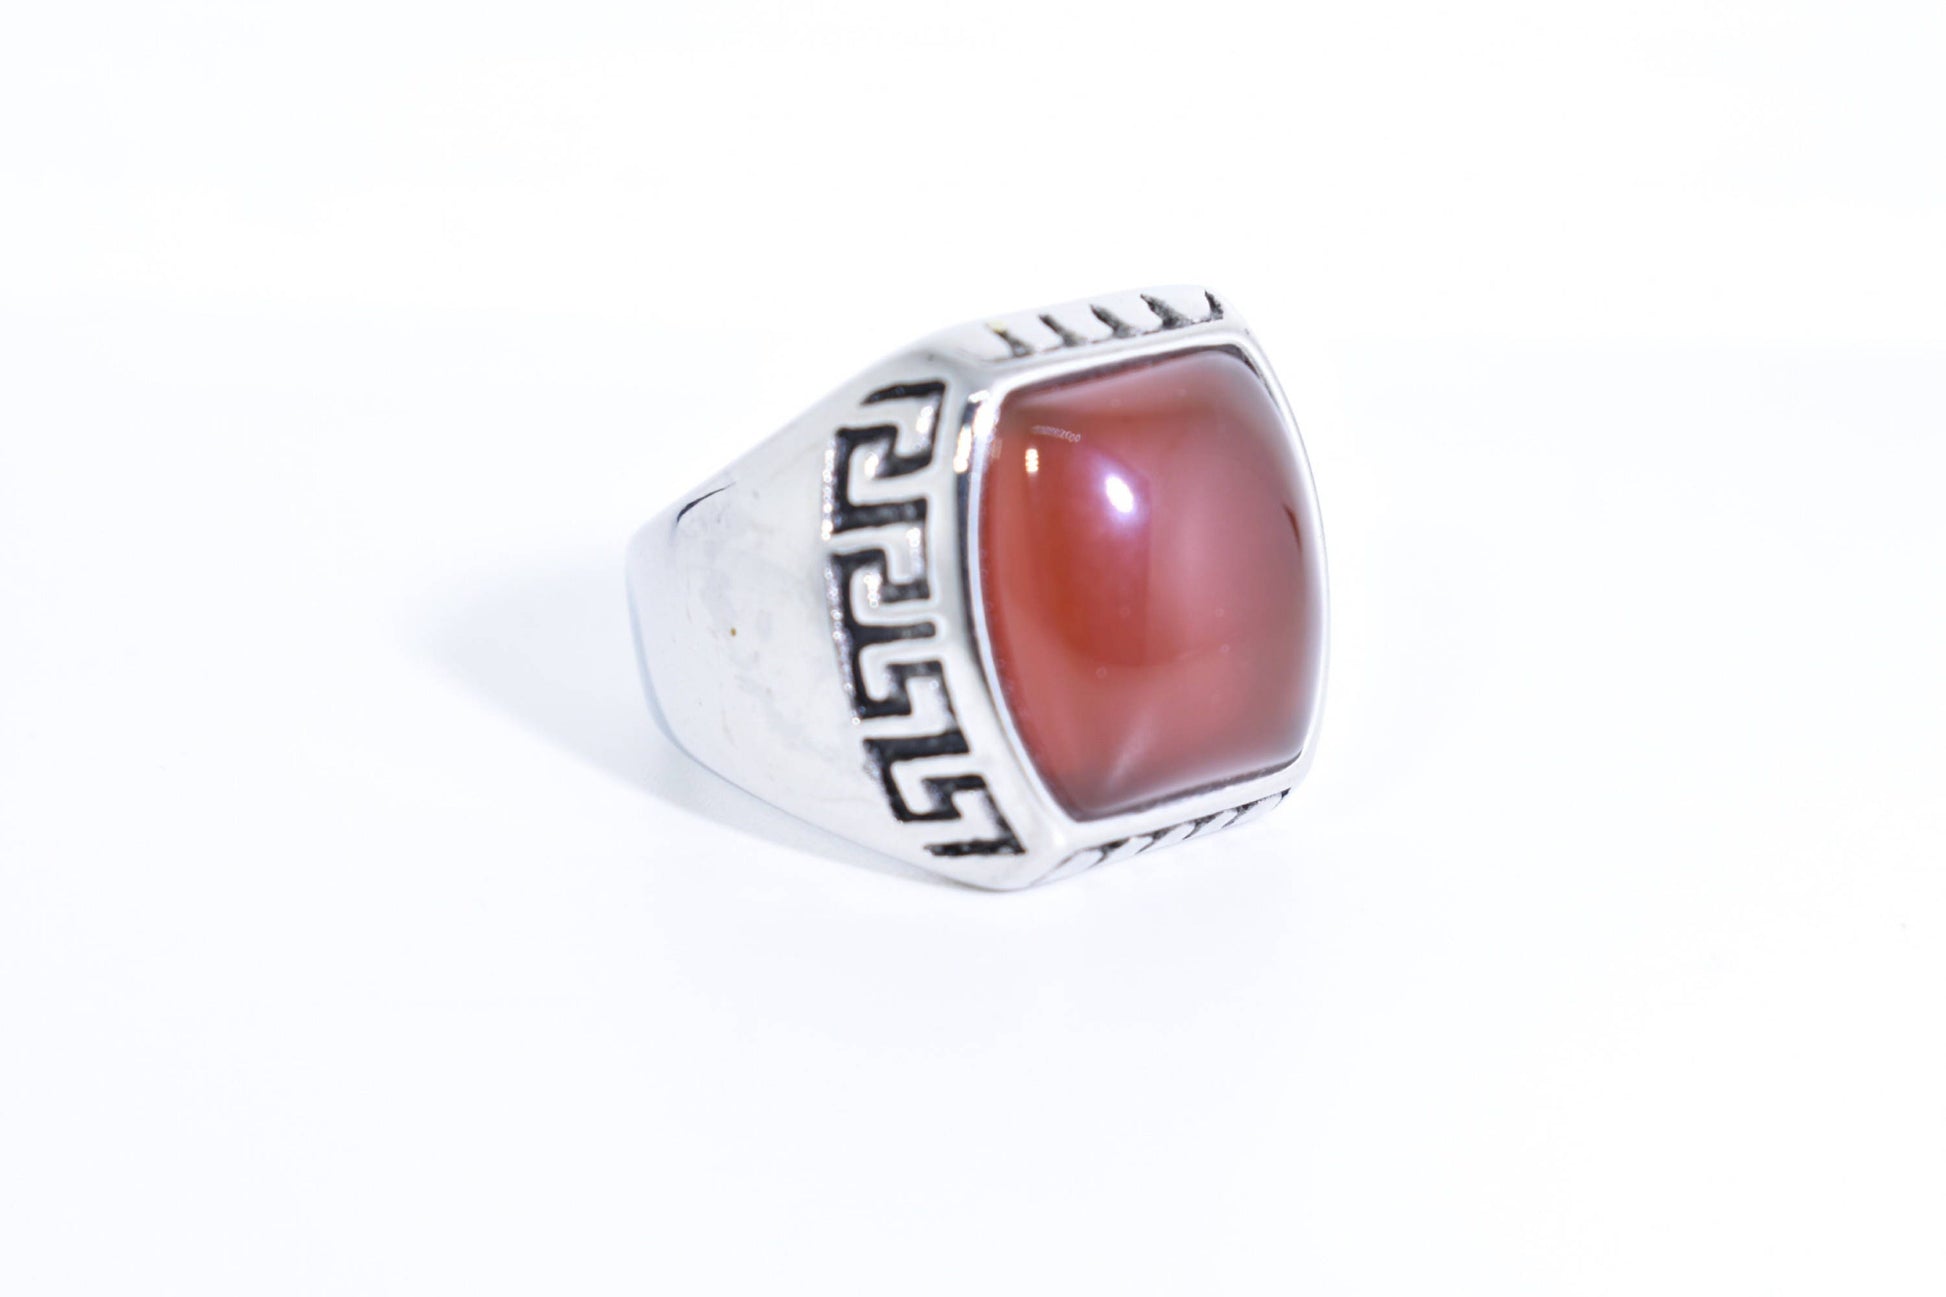 Vintage Gothic Silver Stainless Steel Genuine Red Carnelian Mens Ring